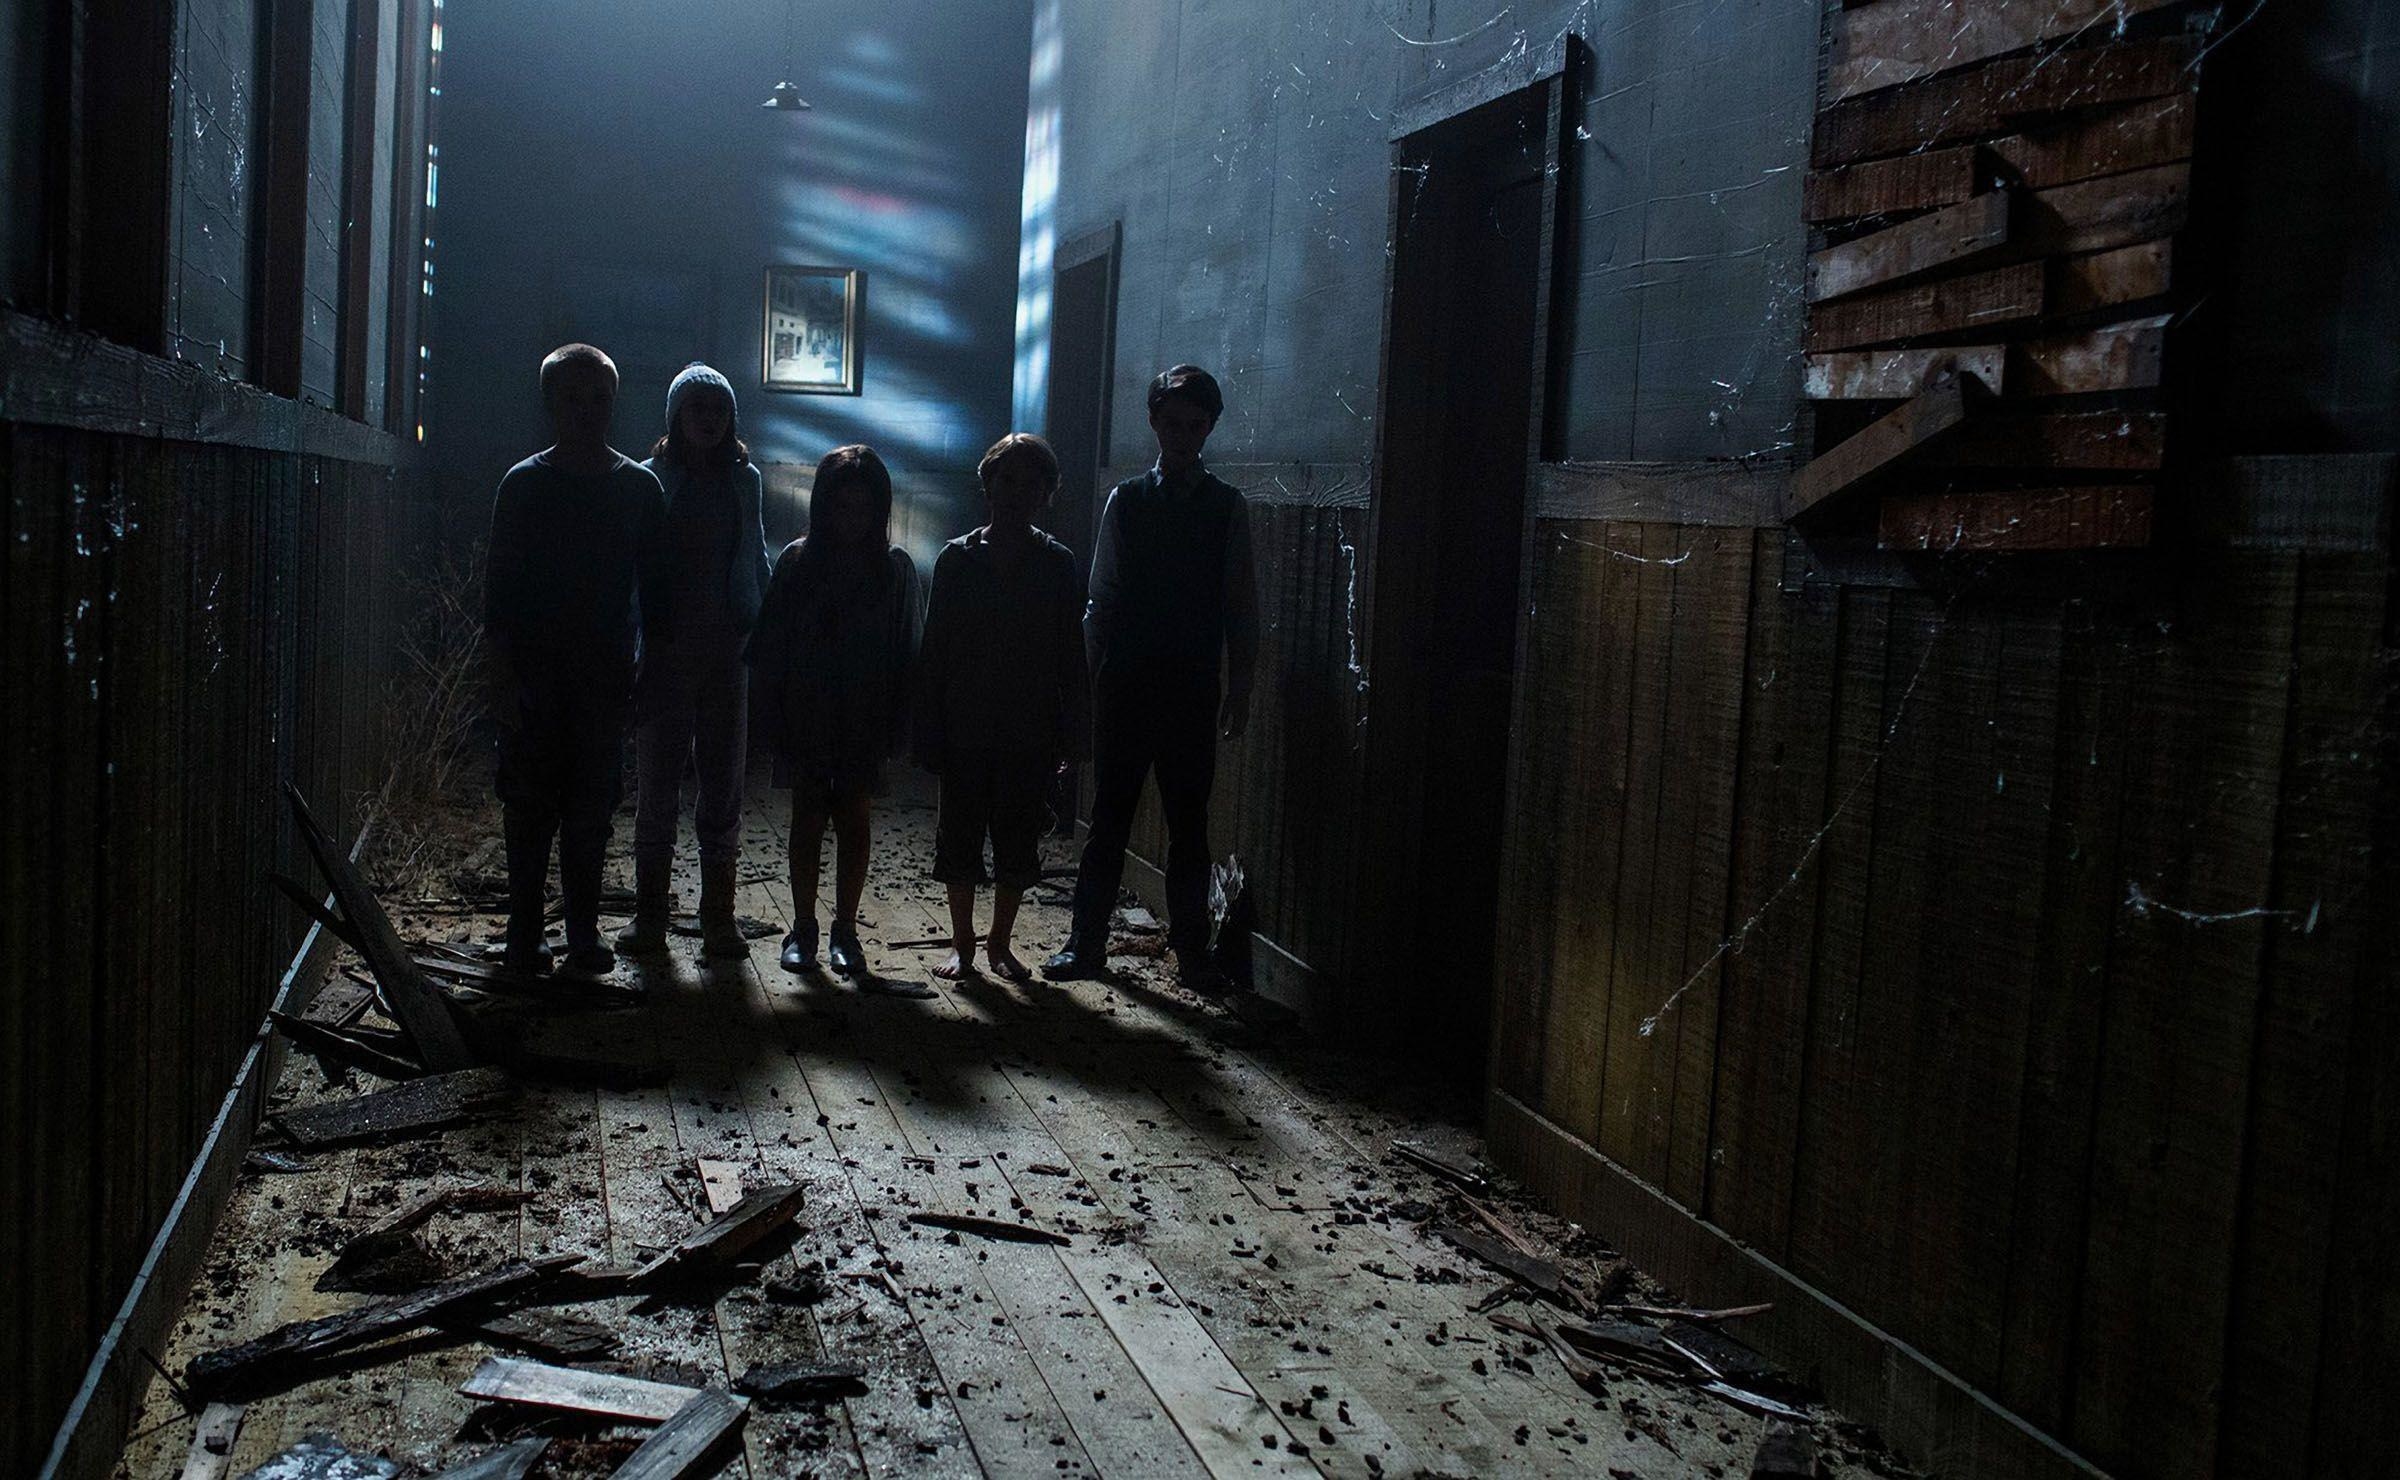 A group of creepy children stand in a decrepit hallway